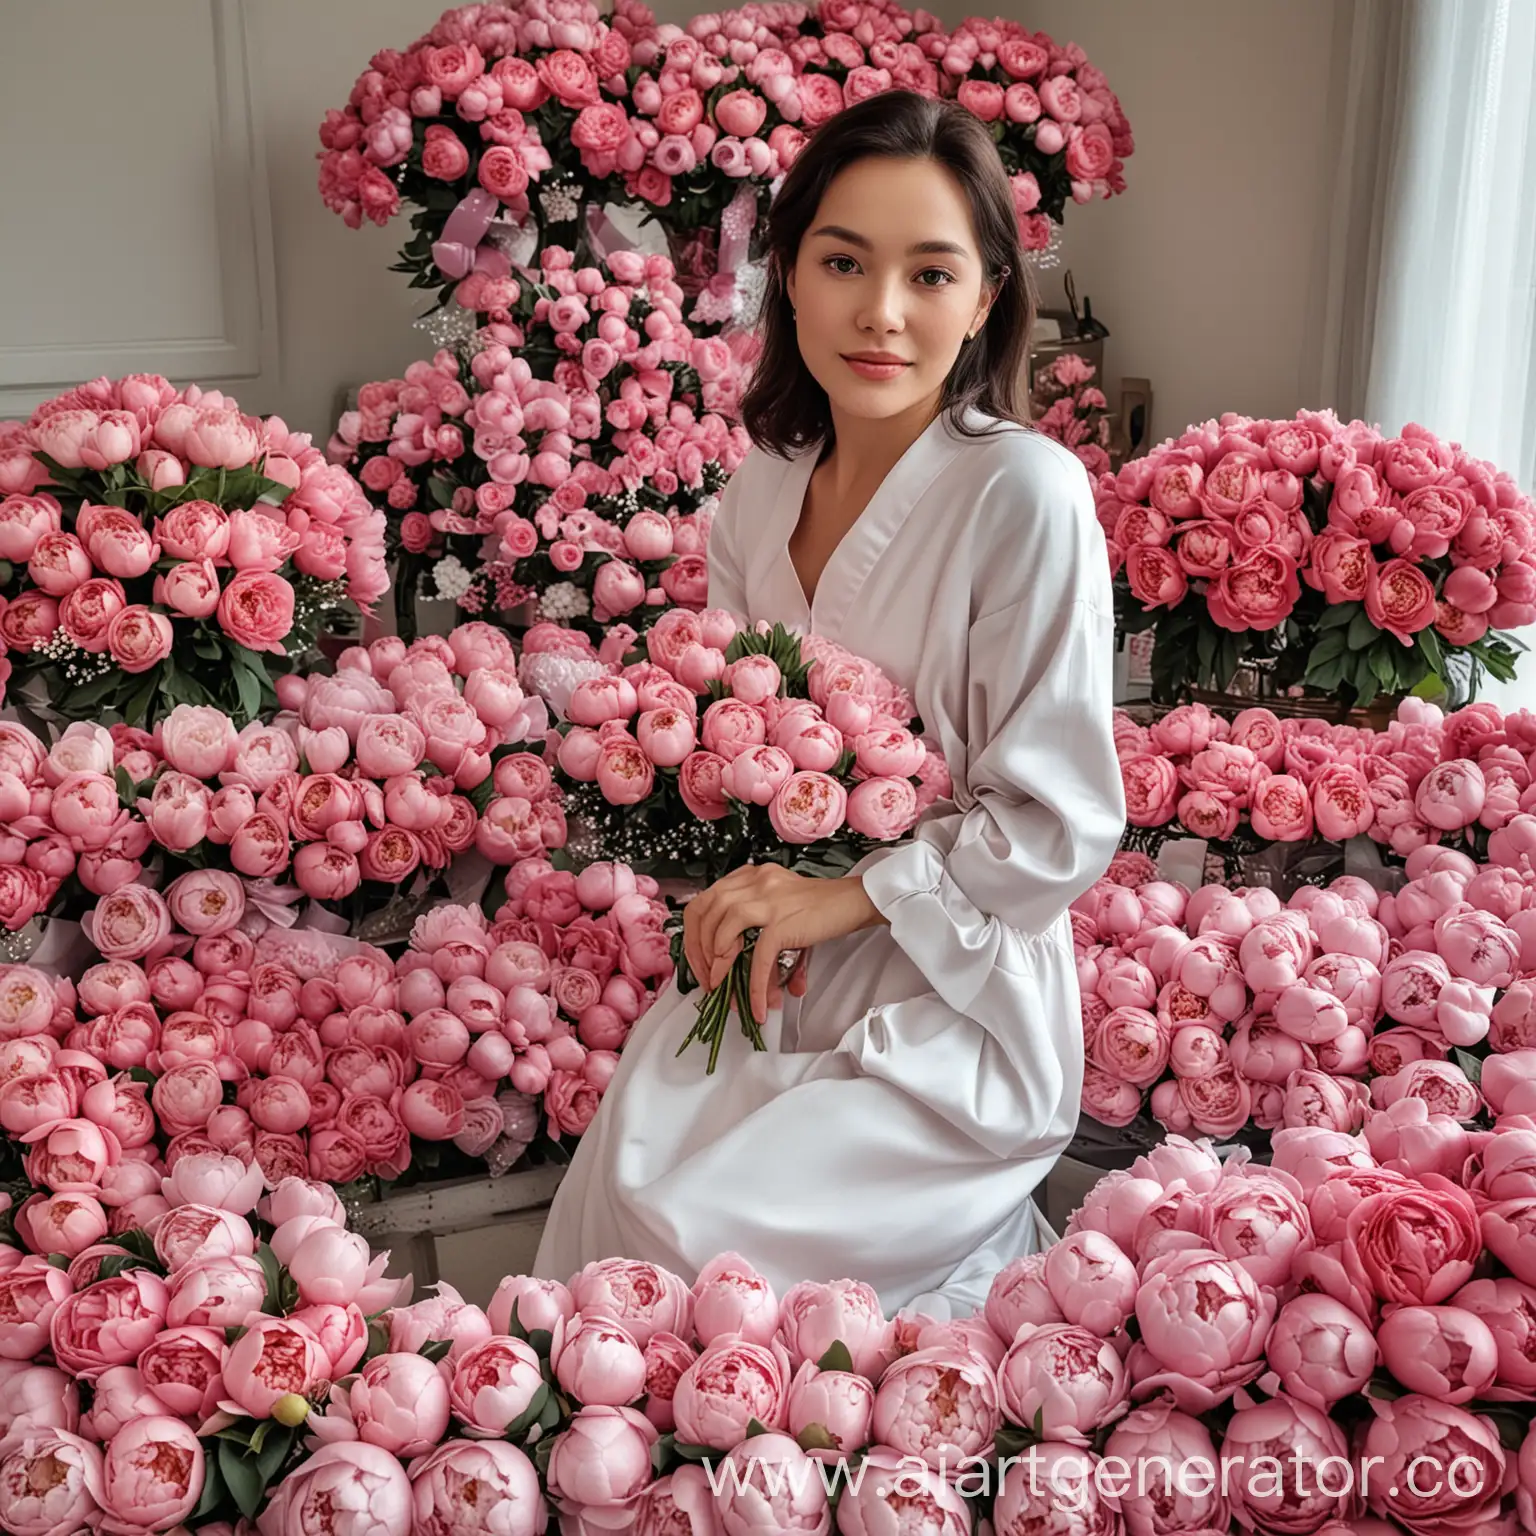 Lady-Surrounded-by-Gifts-and-Peony-Bouquets